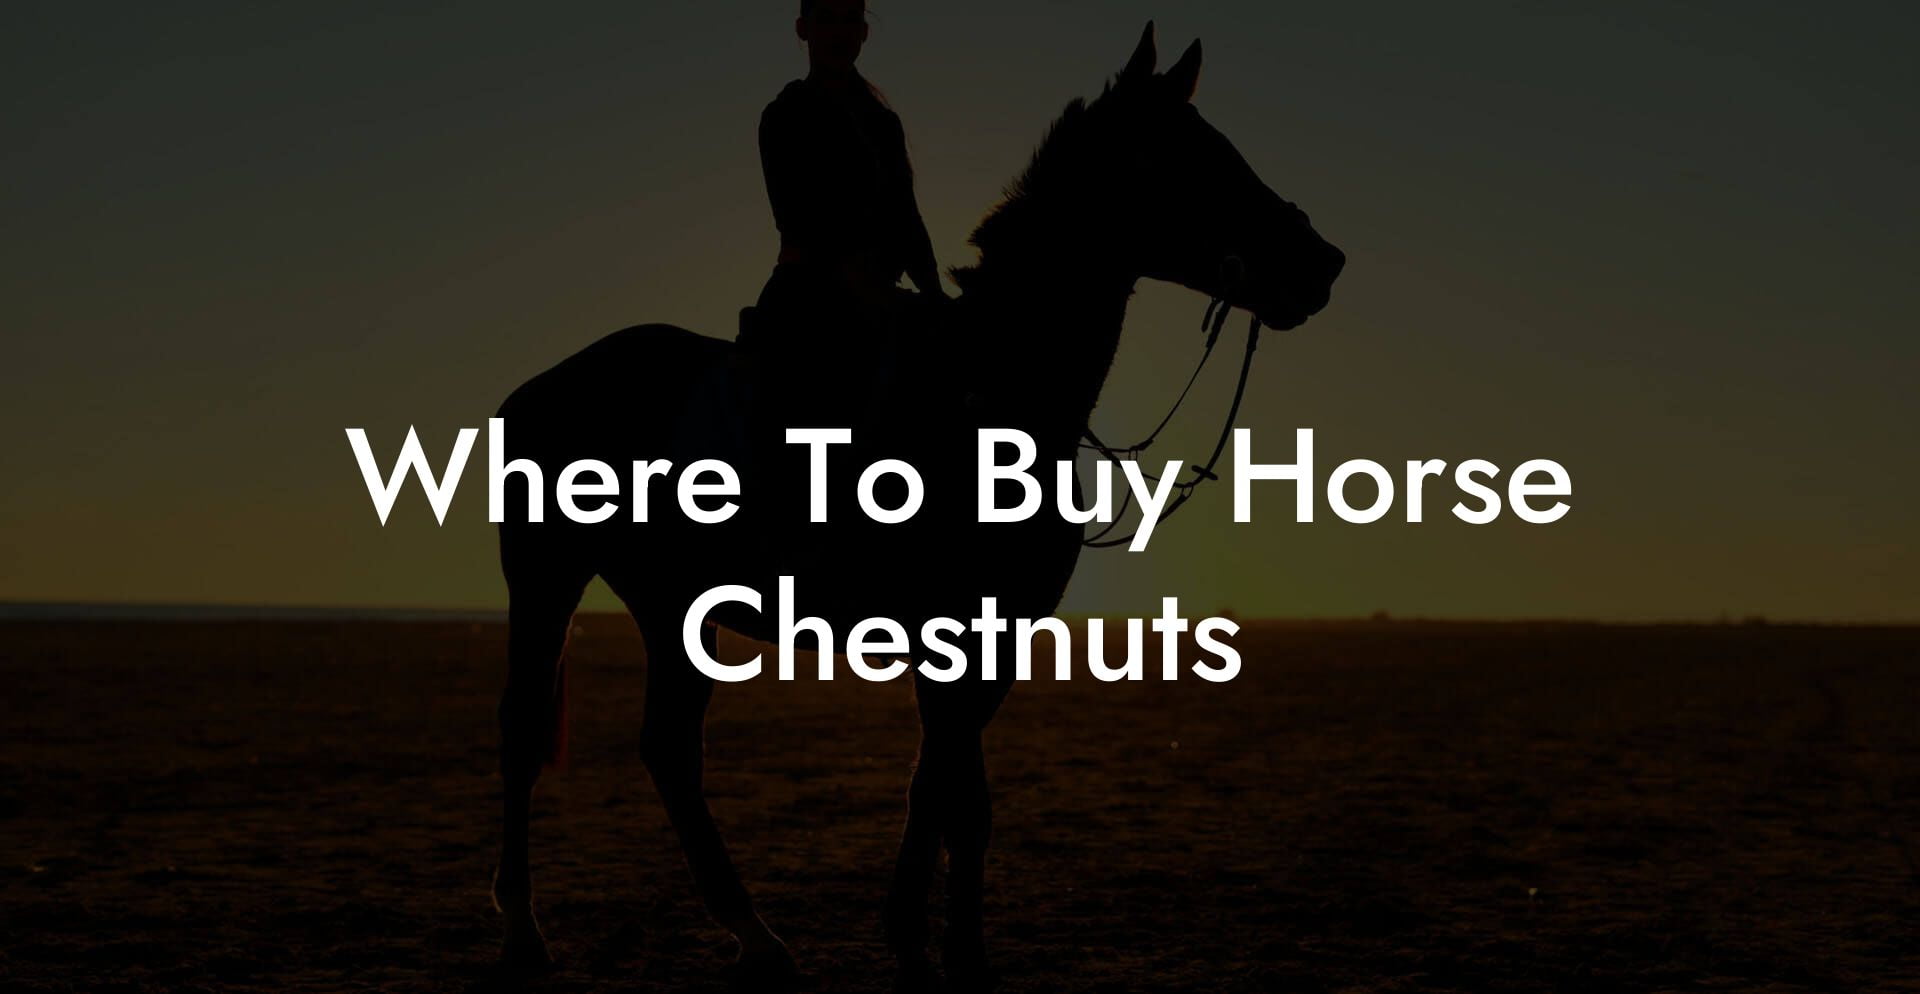 Where To Buy Horse Chestnuts